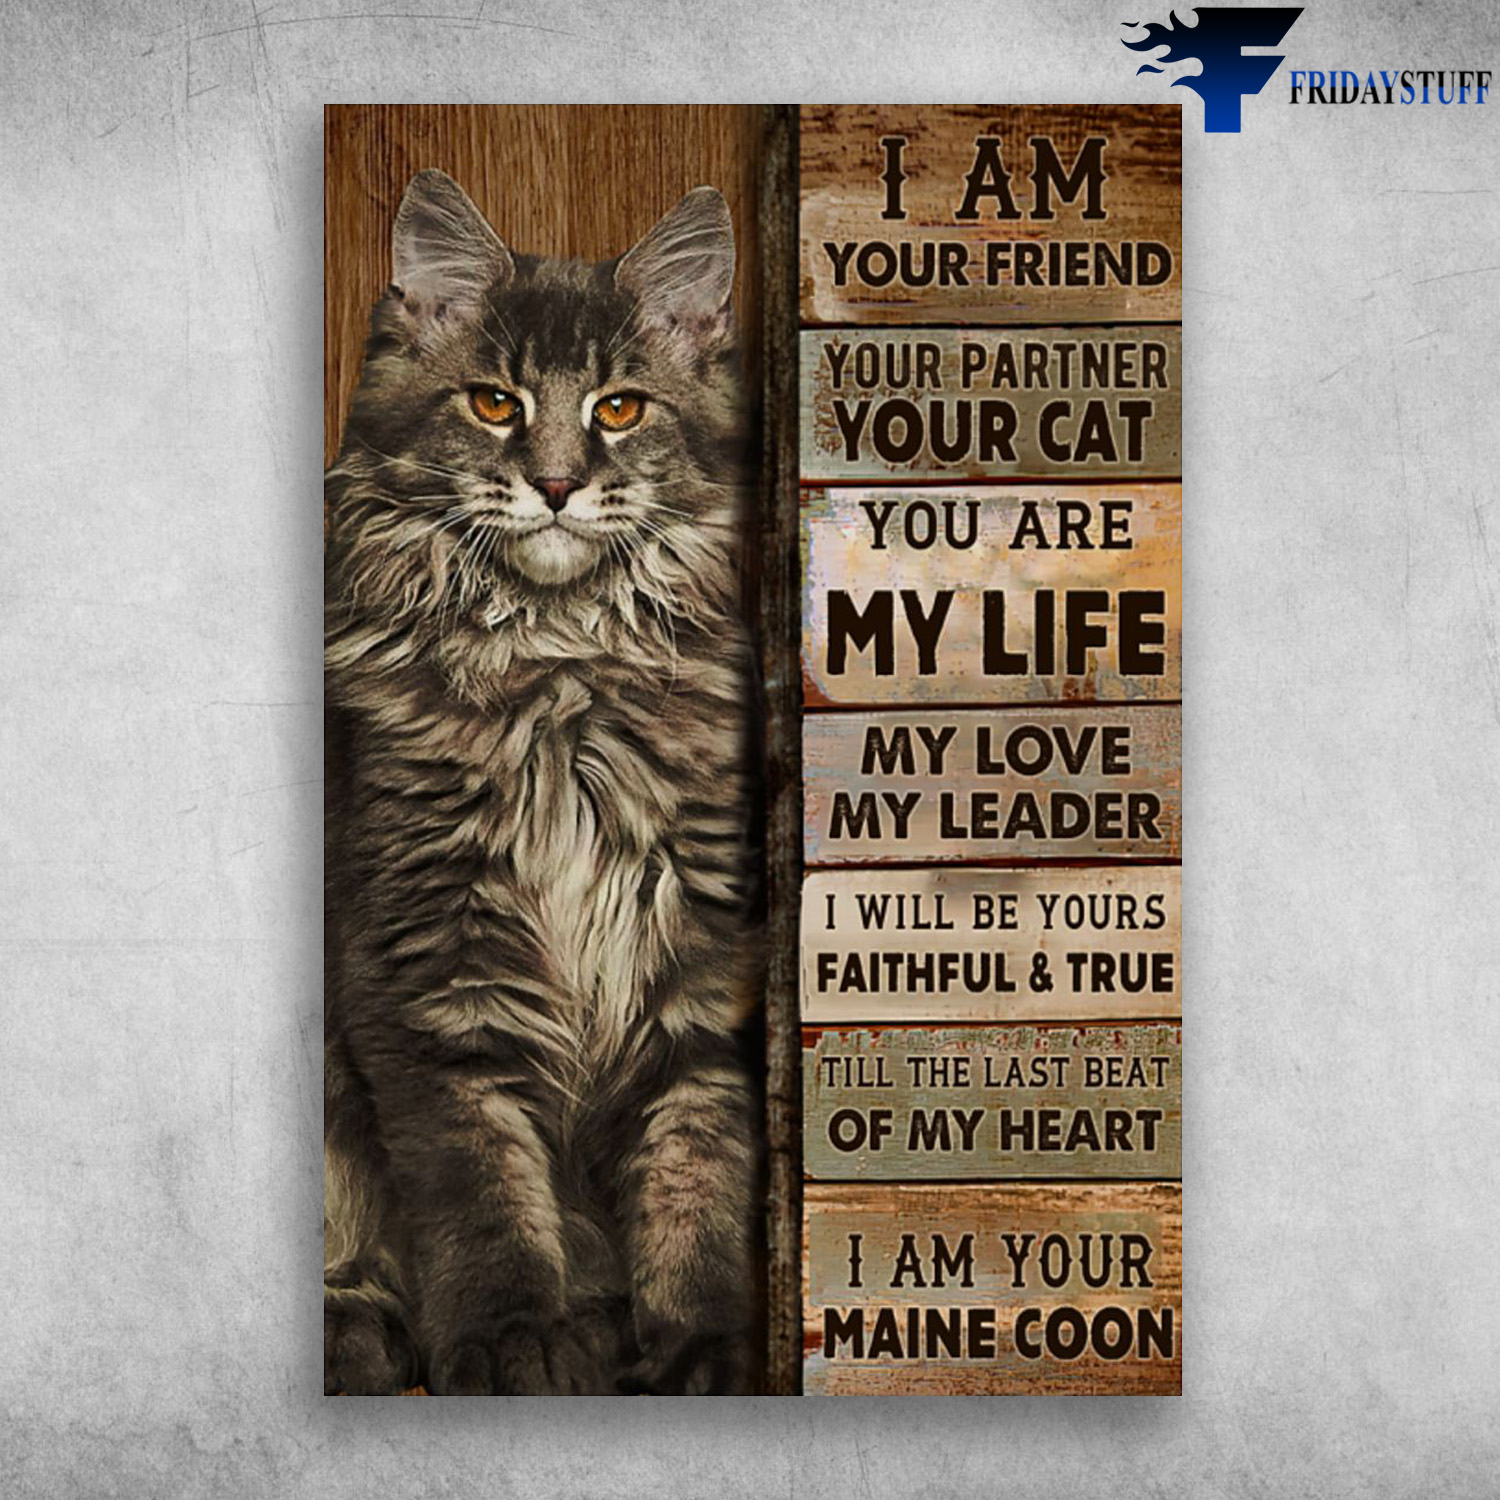 Maine Coon - I Am Your Friend, Your Partner, Your Cat, You Are My Life, My Love, My Leader, I Will Be Yours Faithful And True, Till The Last Beat Of My Heart, I Am Your Maine Coon